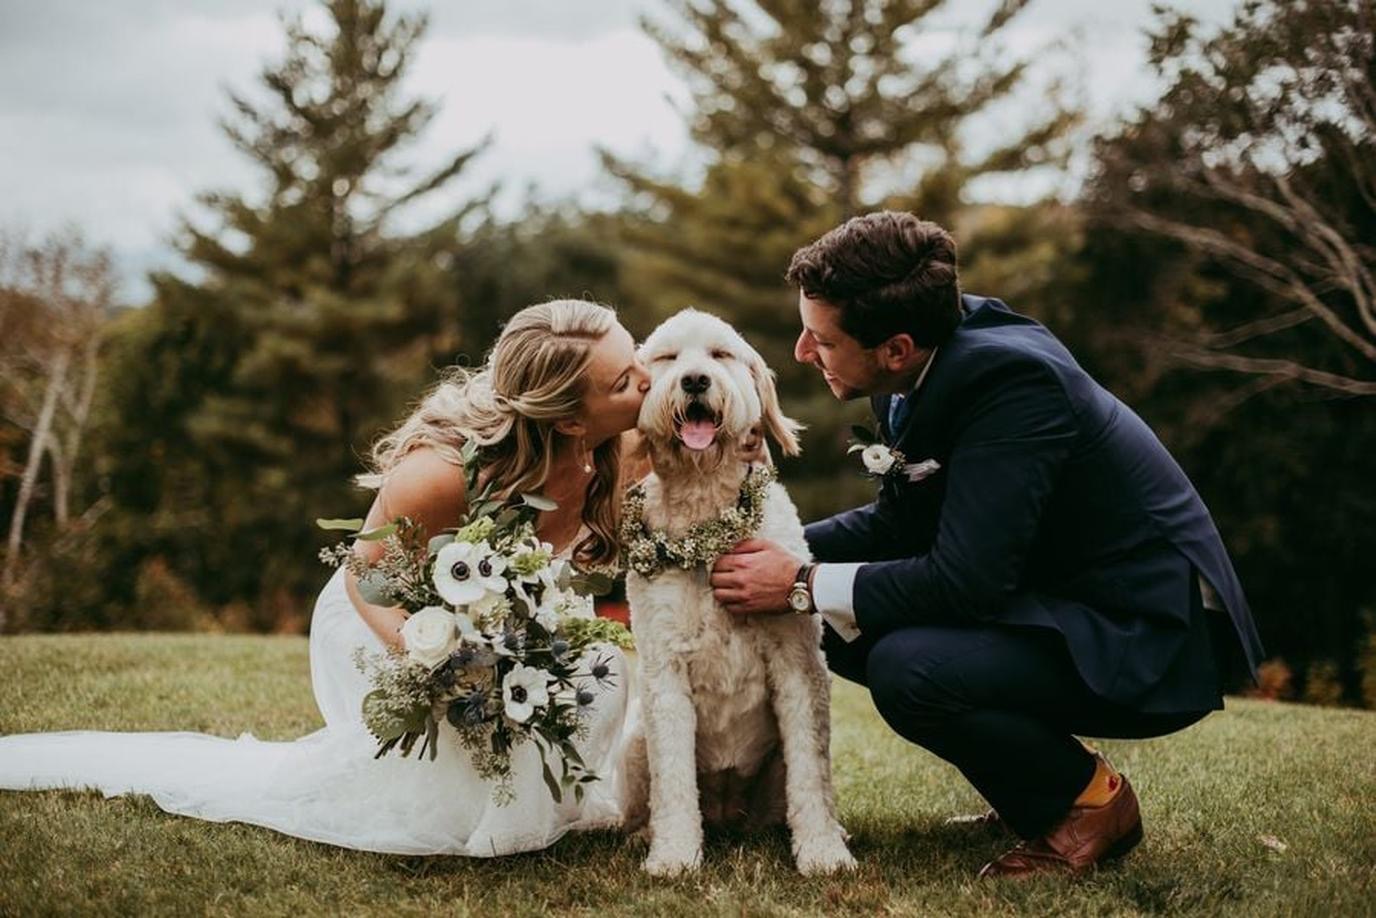 Including Your Furry Friend: Things to Consider When Eloping with Pets